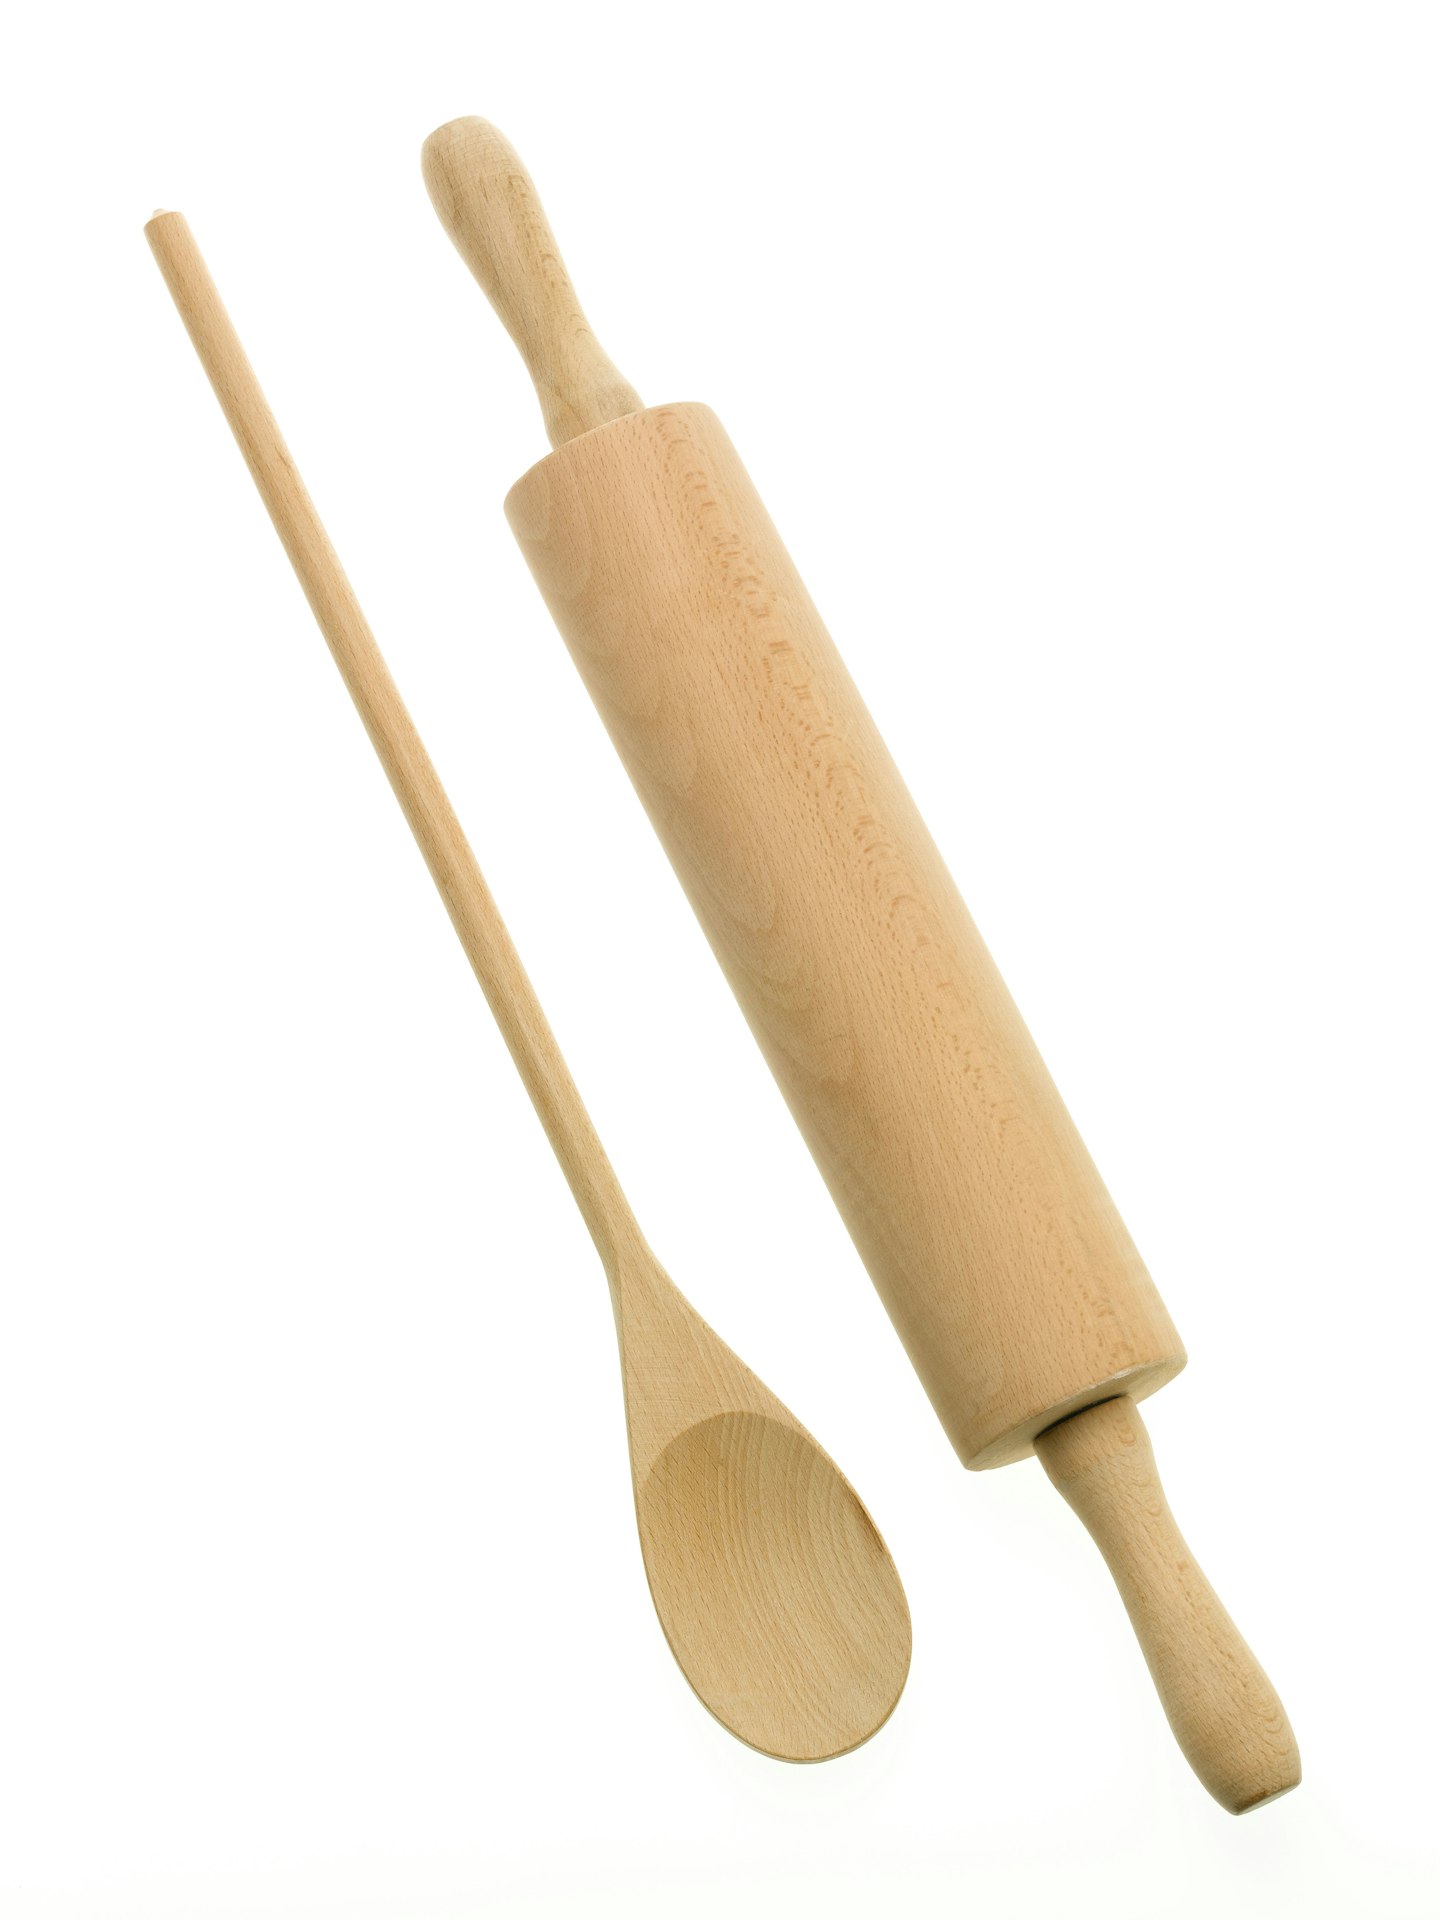 Wooden spoon and rolling pin